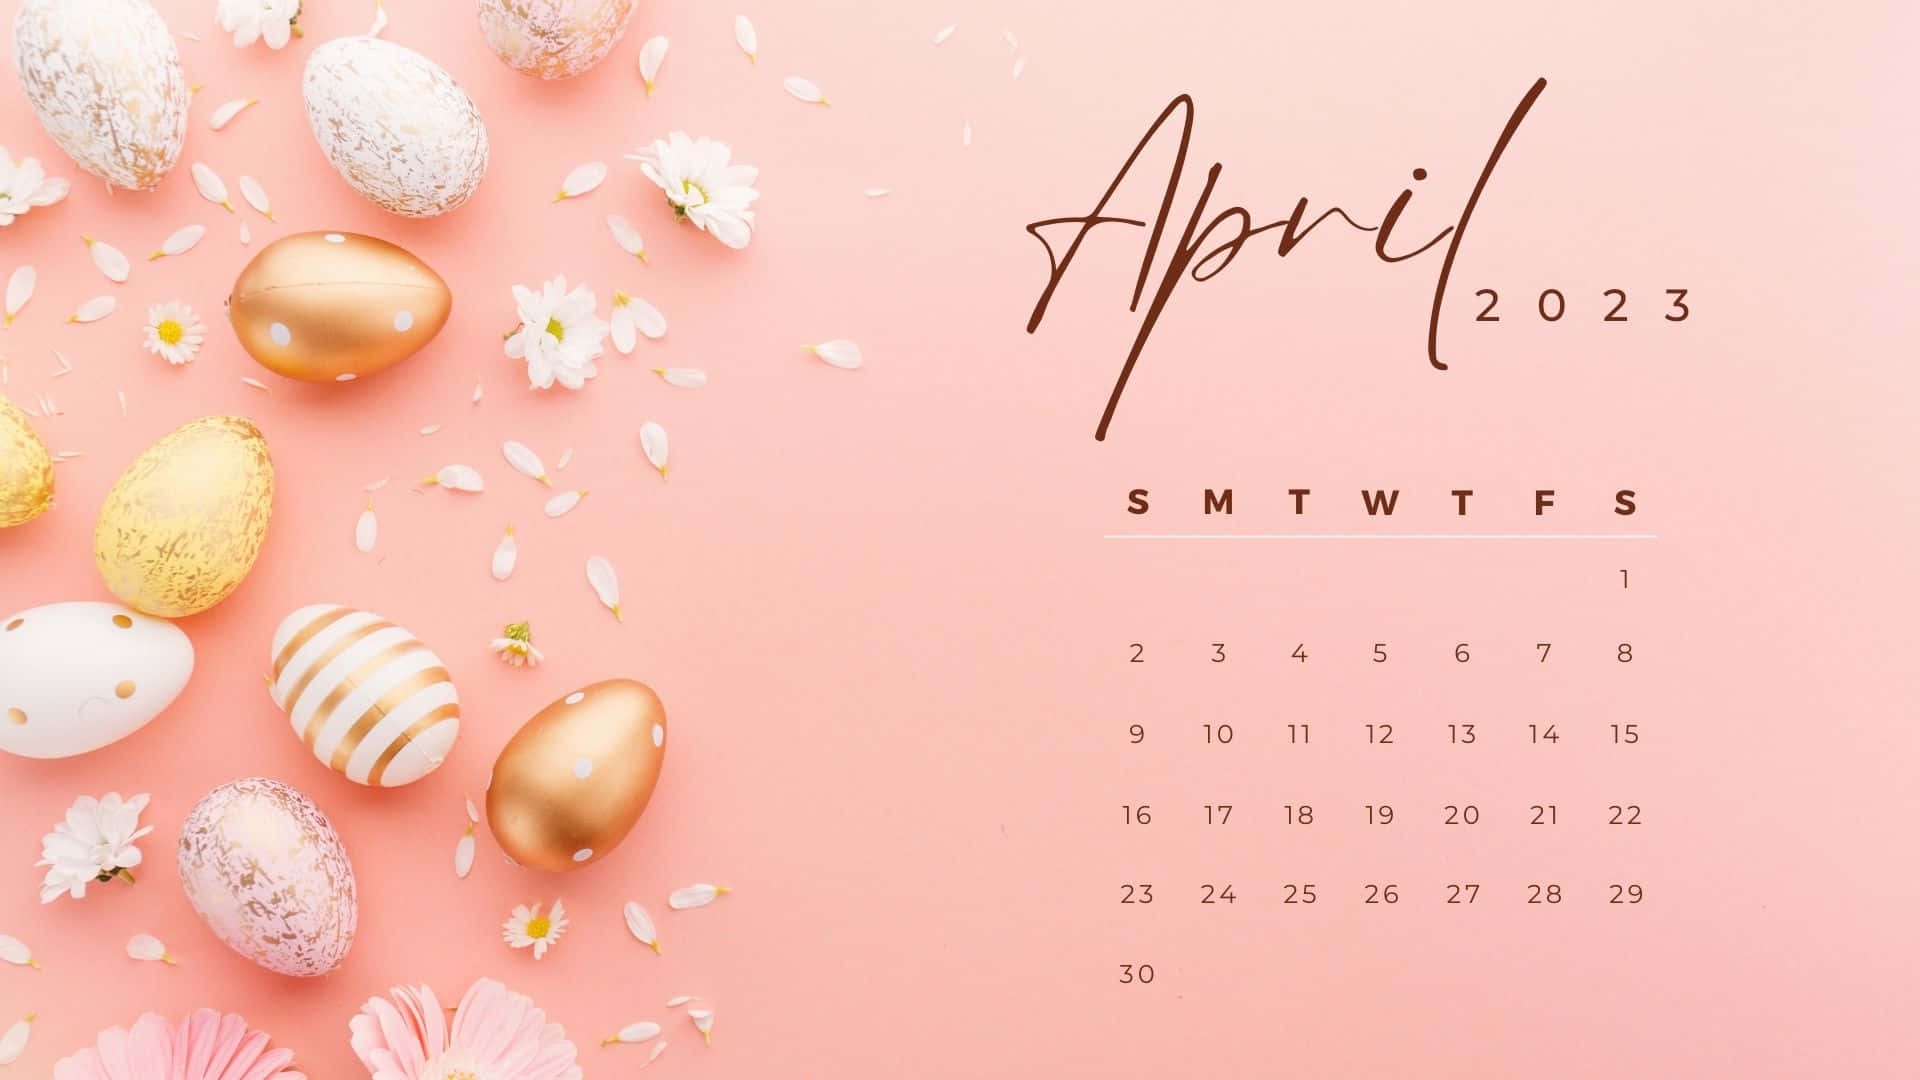 April 2020 Calendar With Easter Eggs And Flowers Wallpaper